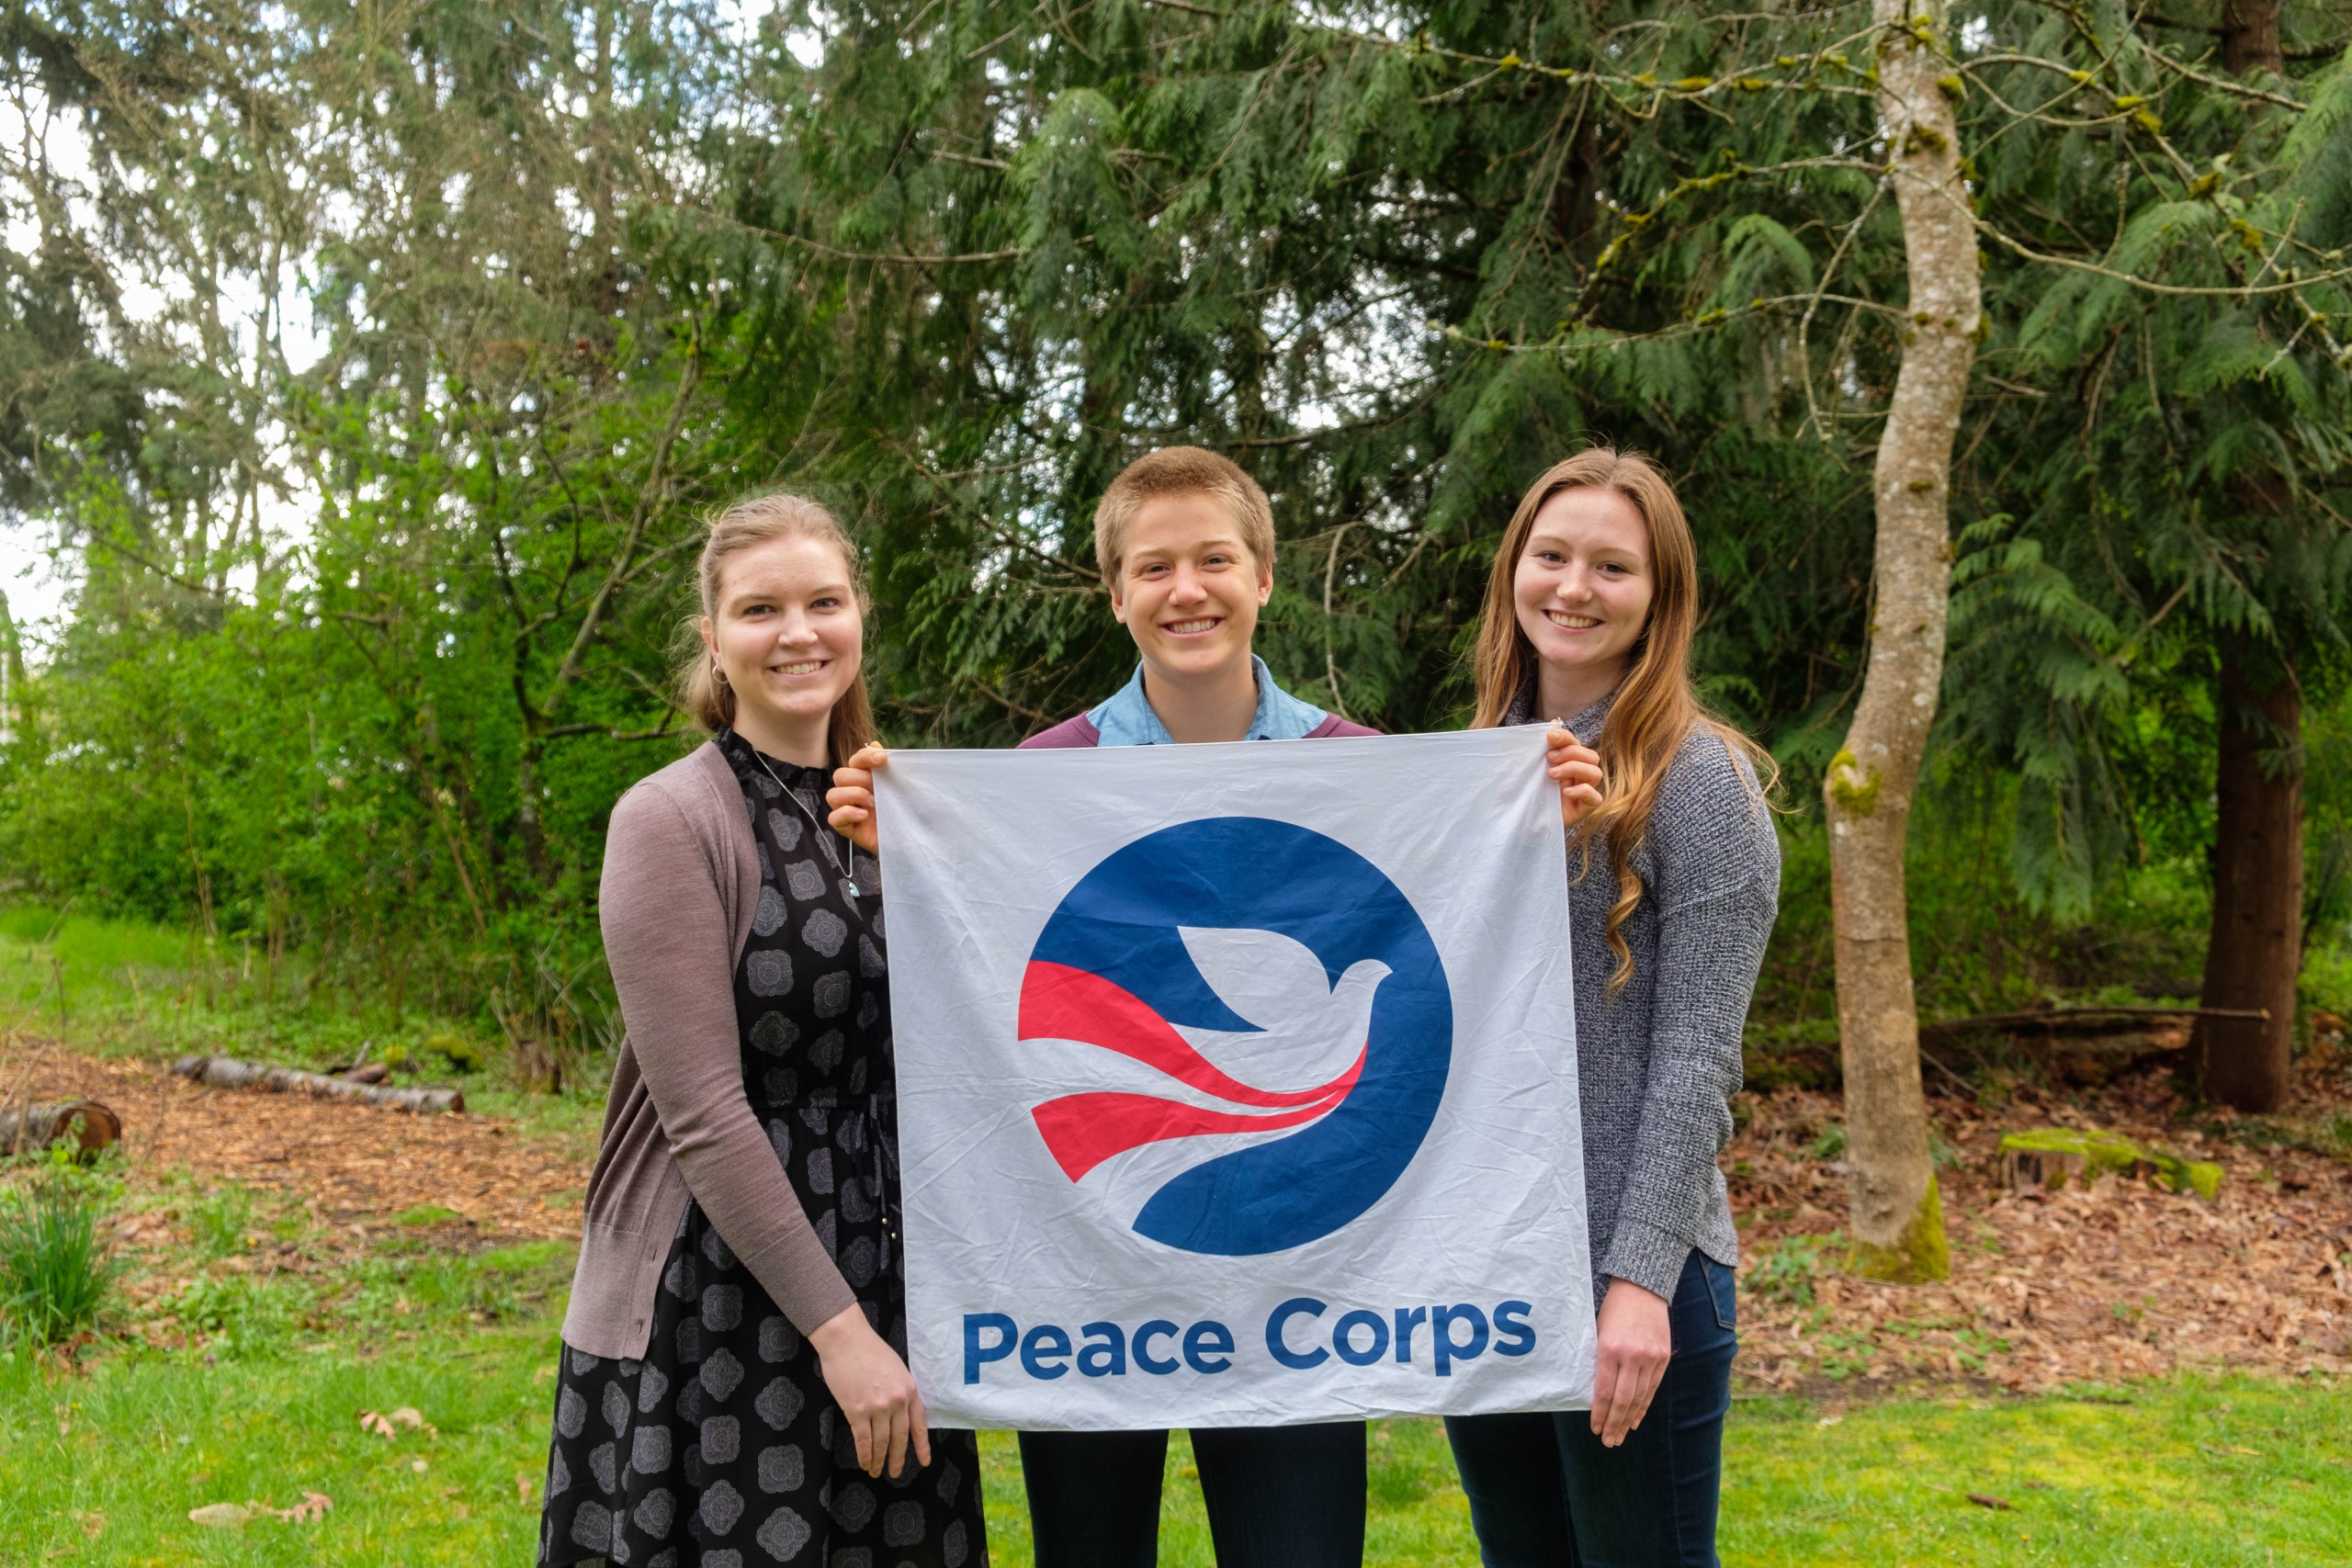 Haley Bridgewater '18 (left) is pictured along with Margaret Chell '18 and Madeline Wentz '18. All three Lutes will travel to Guinea to serve in the Peace Corps after graduation. (Photo by John Froschauer/PLU)